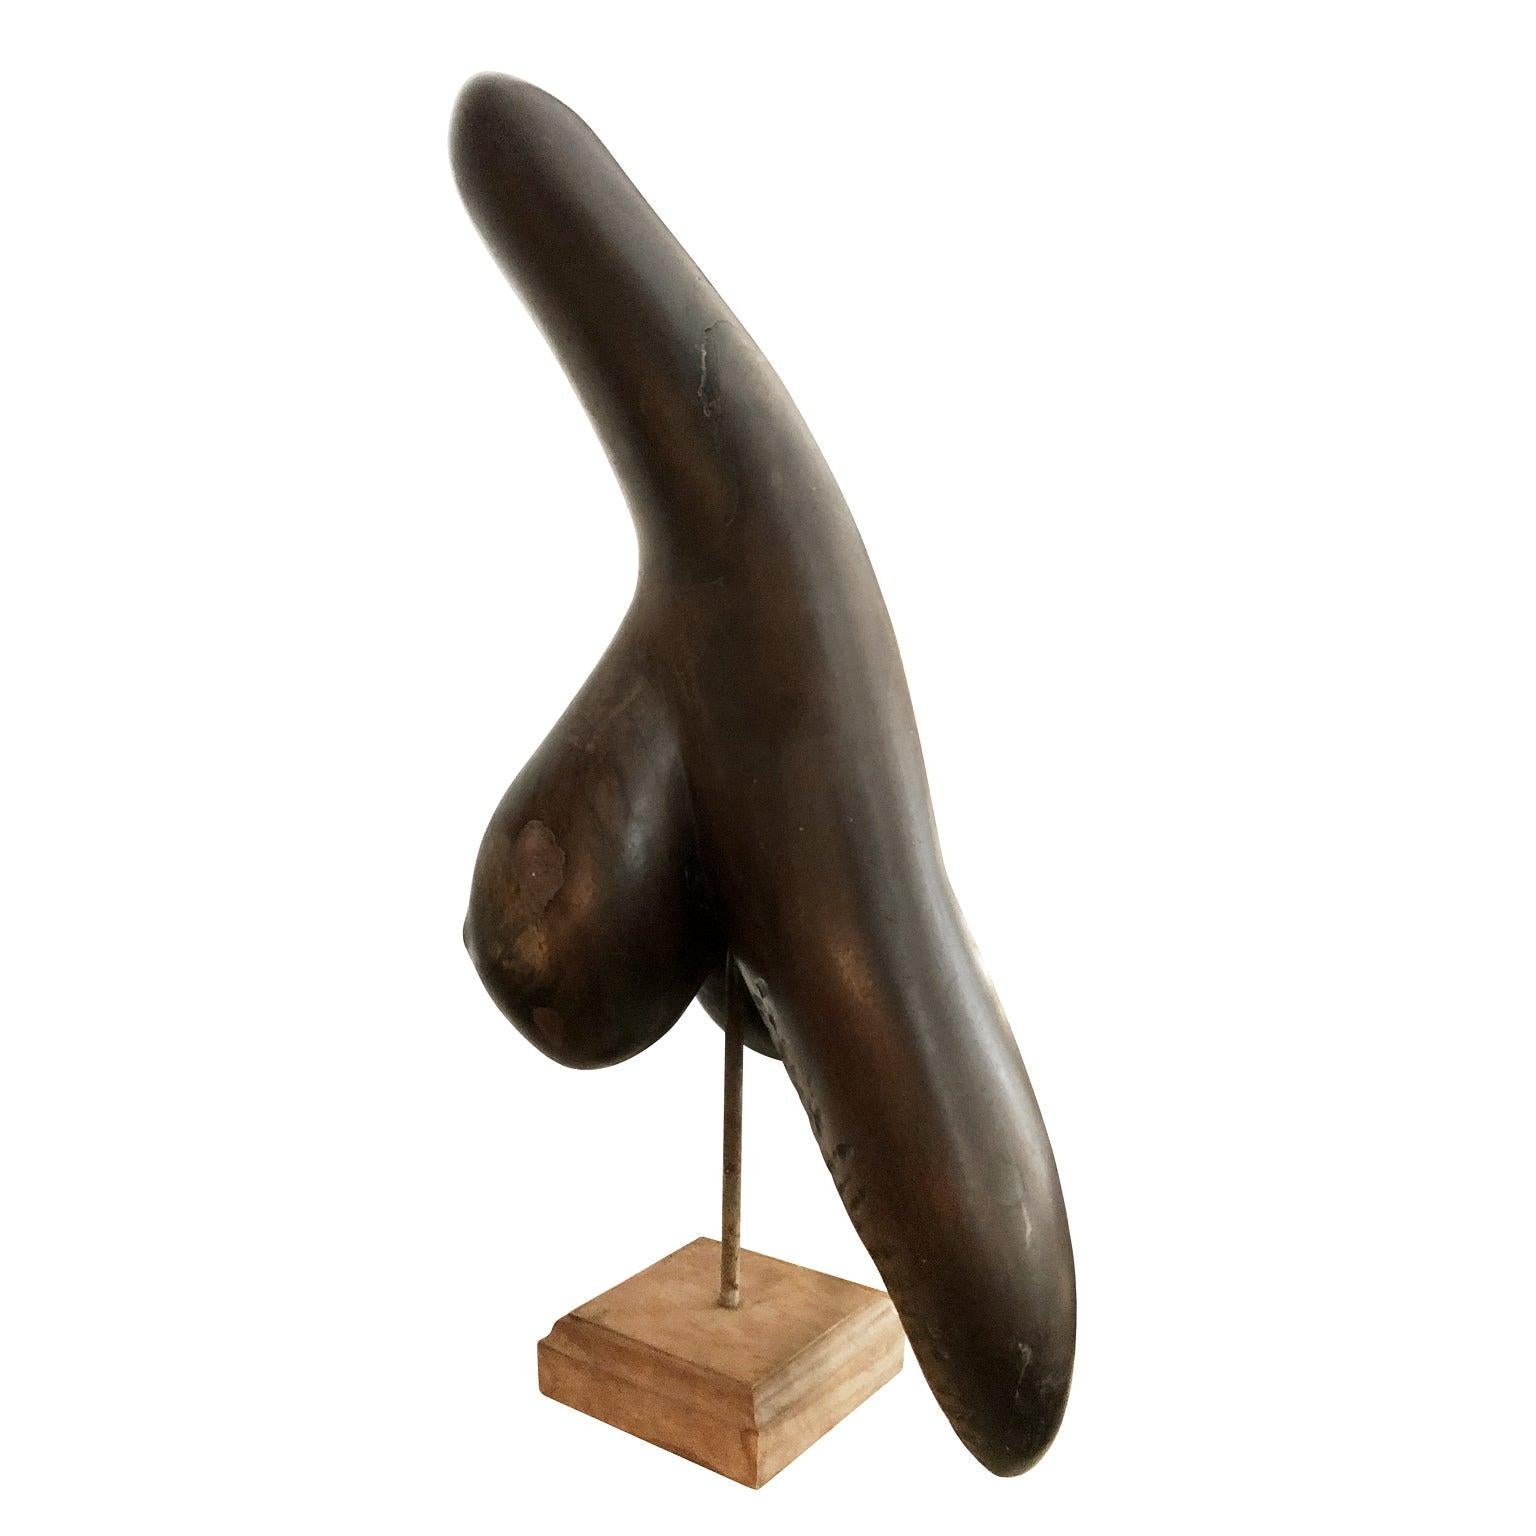 Modernist carved wood sculpture on square base with metal signature plaque by Rotellini, Italy, 1960s.
 